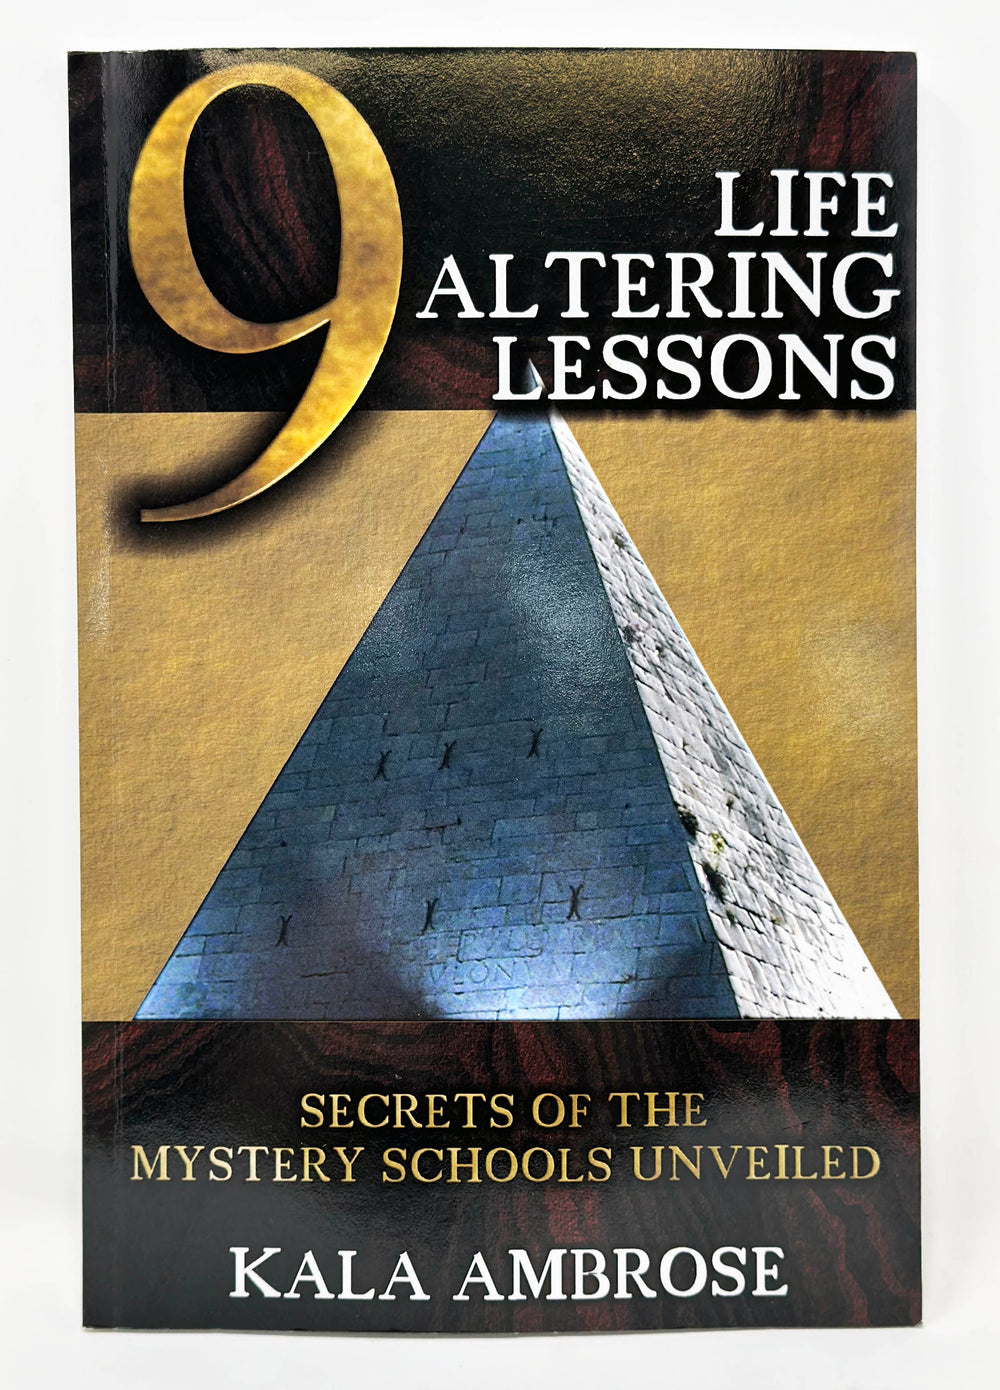 9 Life Altering Lessons